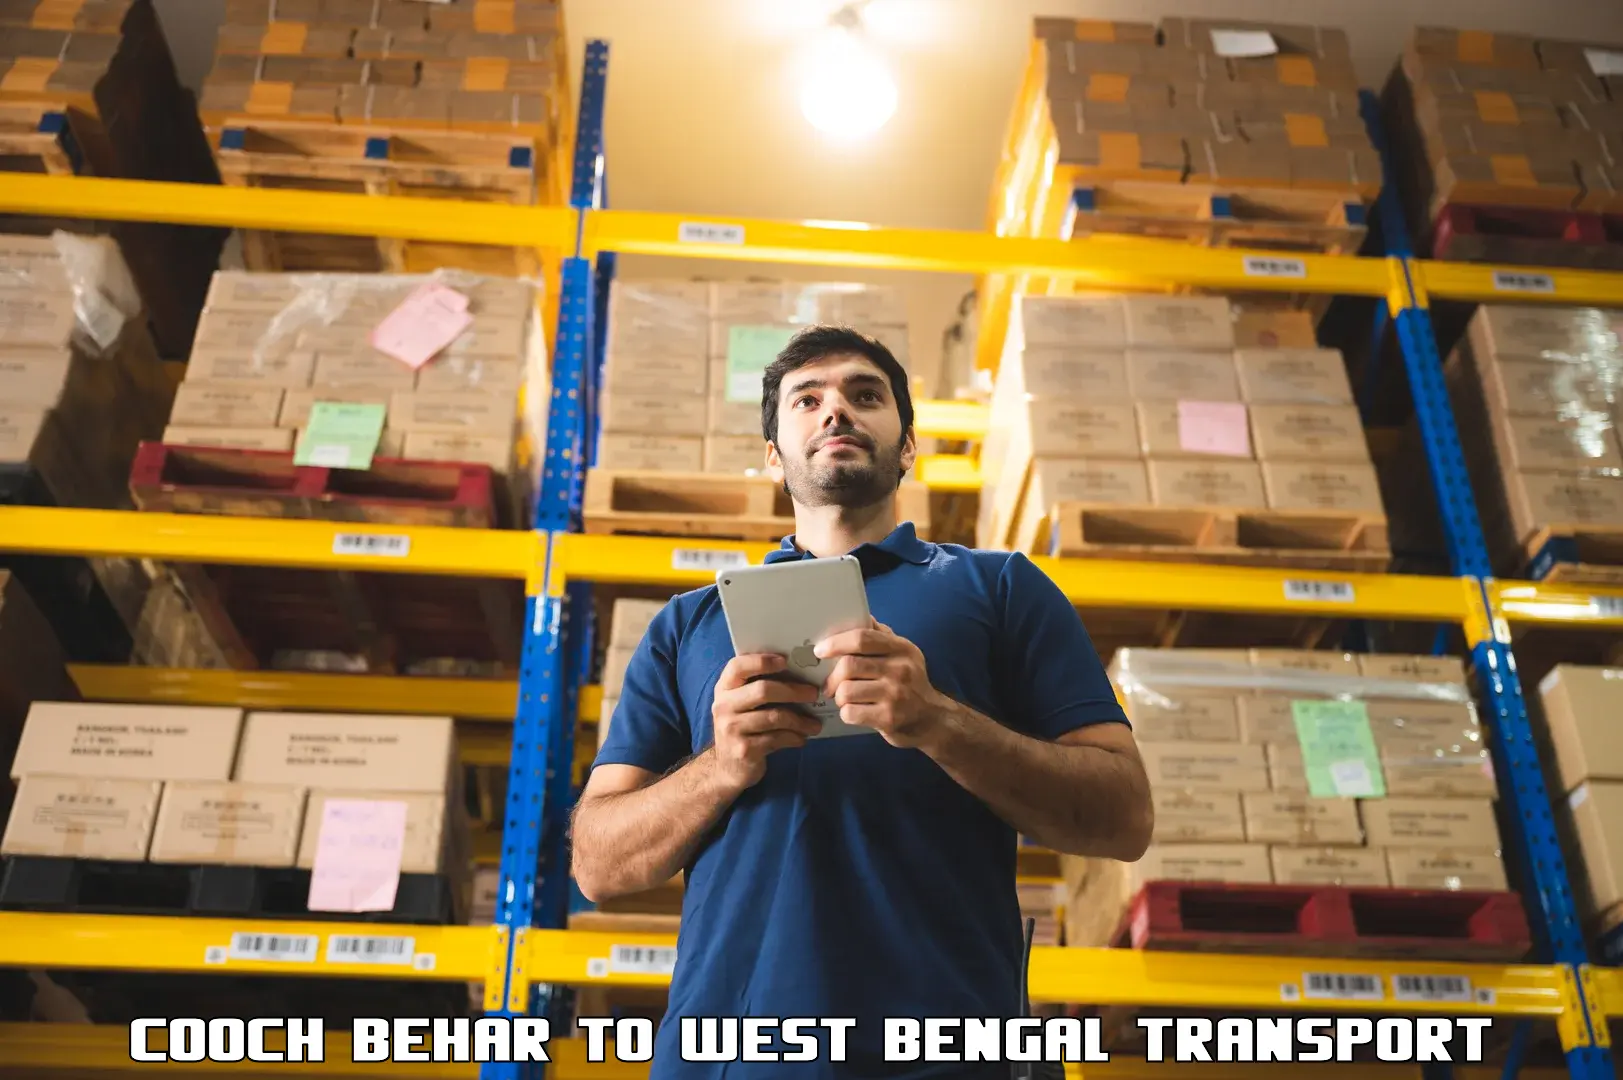 Truck transport companies in India Cooch Behar to Ama Dubi